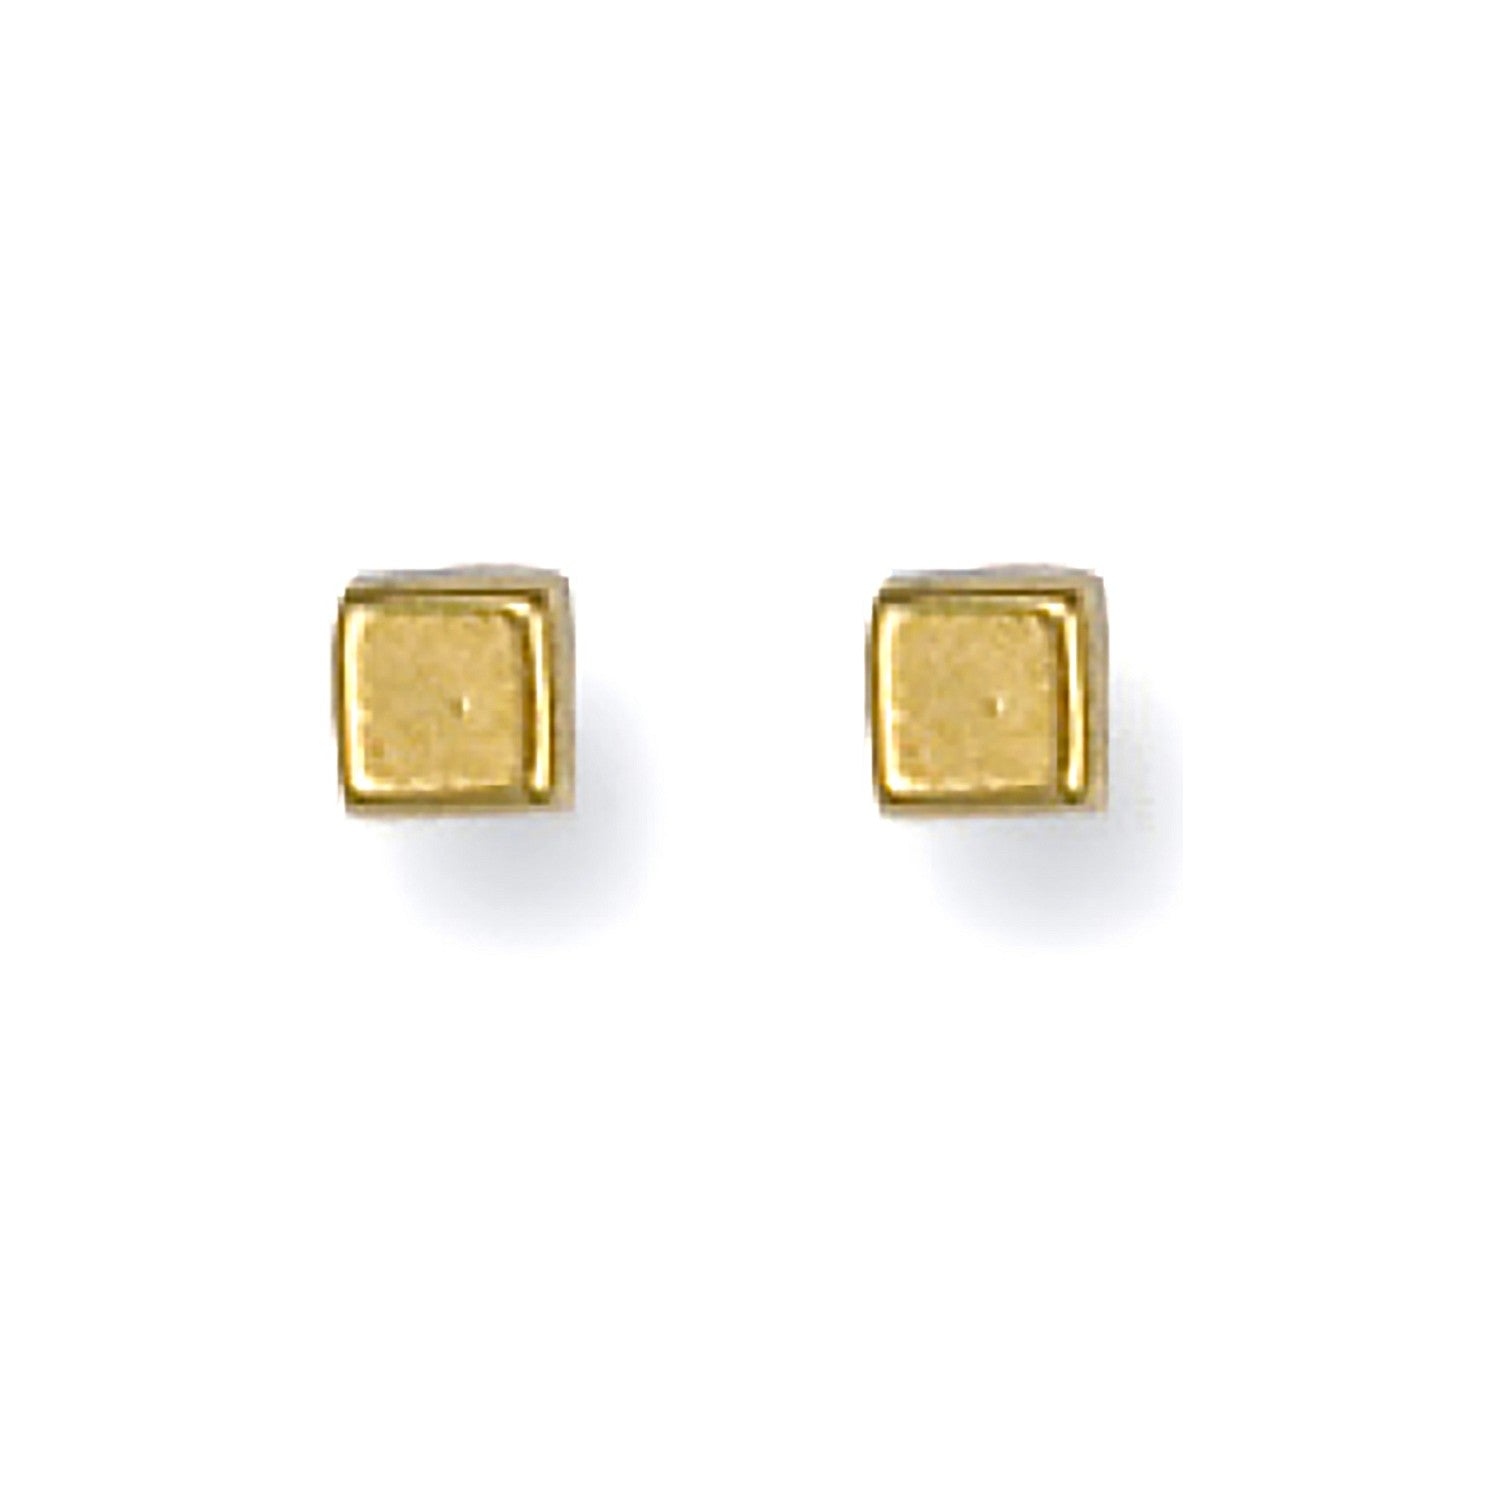 Yellow Gold 4mm Square Cube Studs